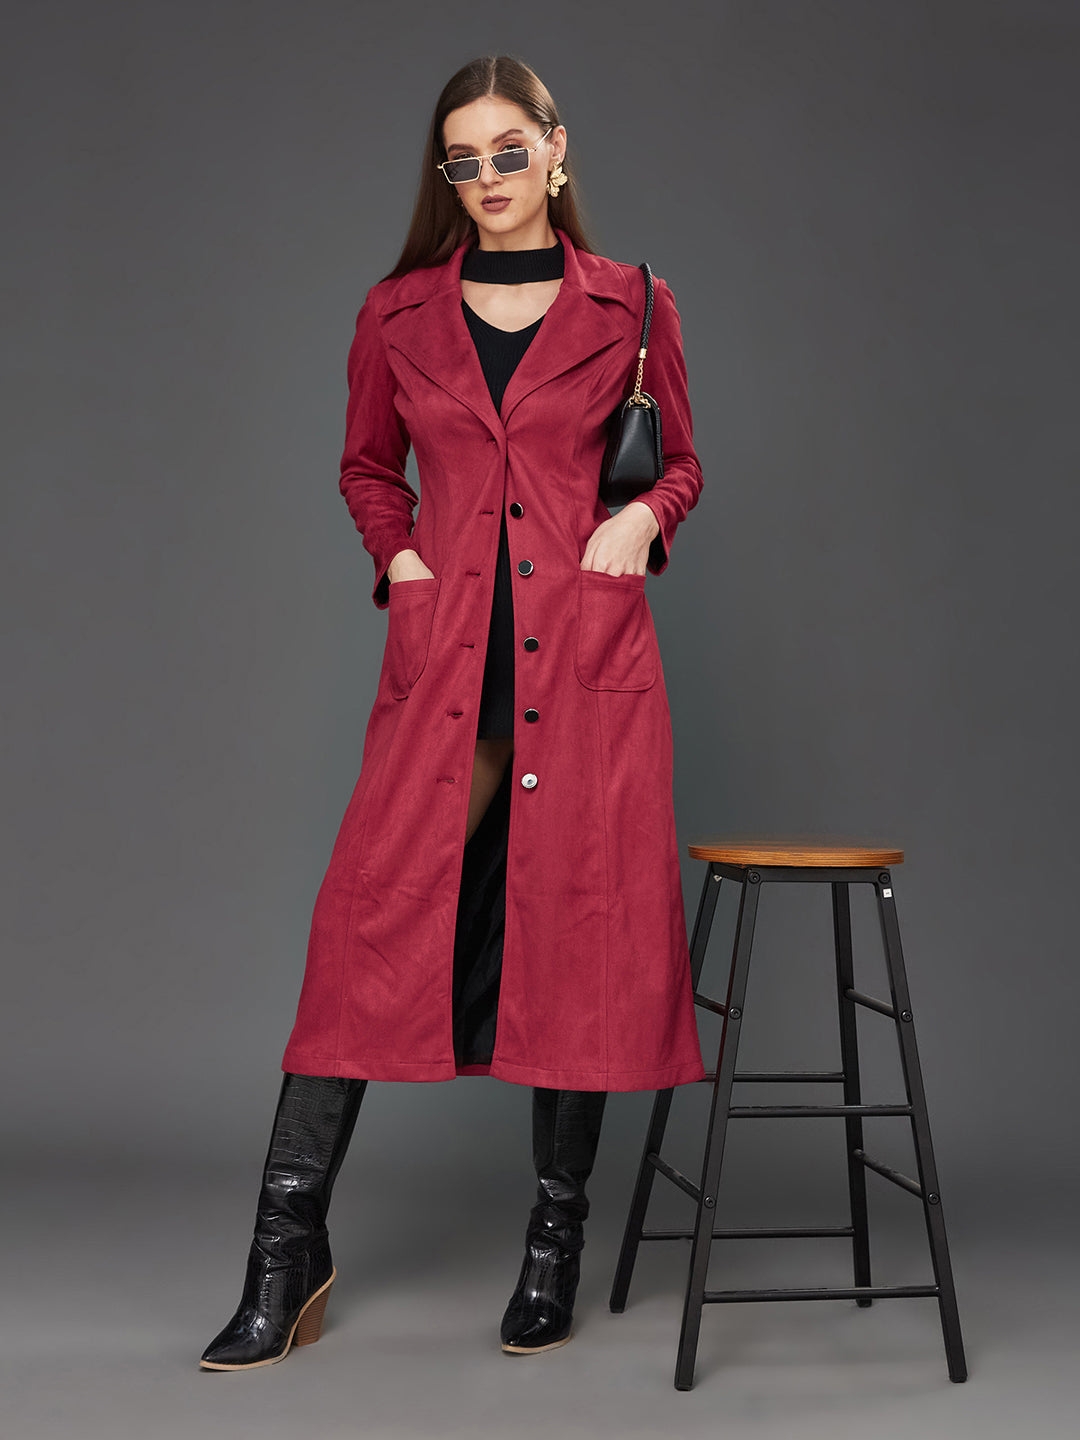 MISS CHASE | Dark Red Solid V-Neck Full Sleeves Patched Pocketed Polyester Button Down Longline Winter Wear Jacket